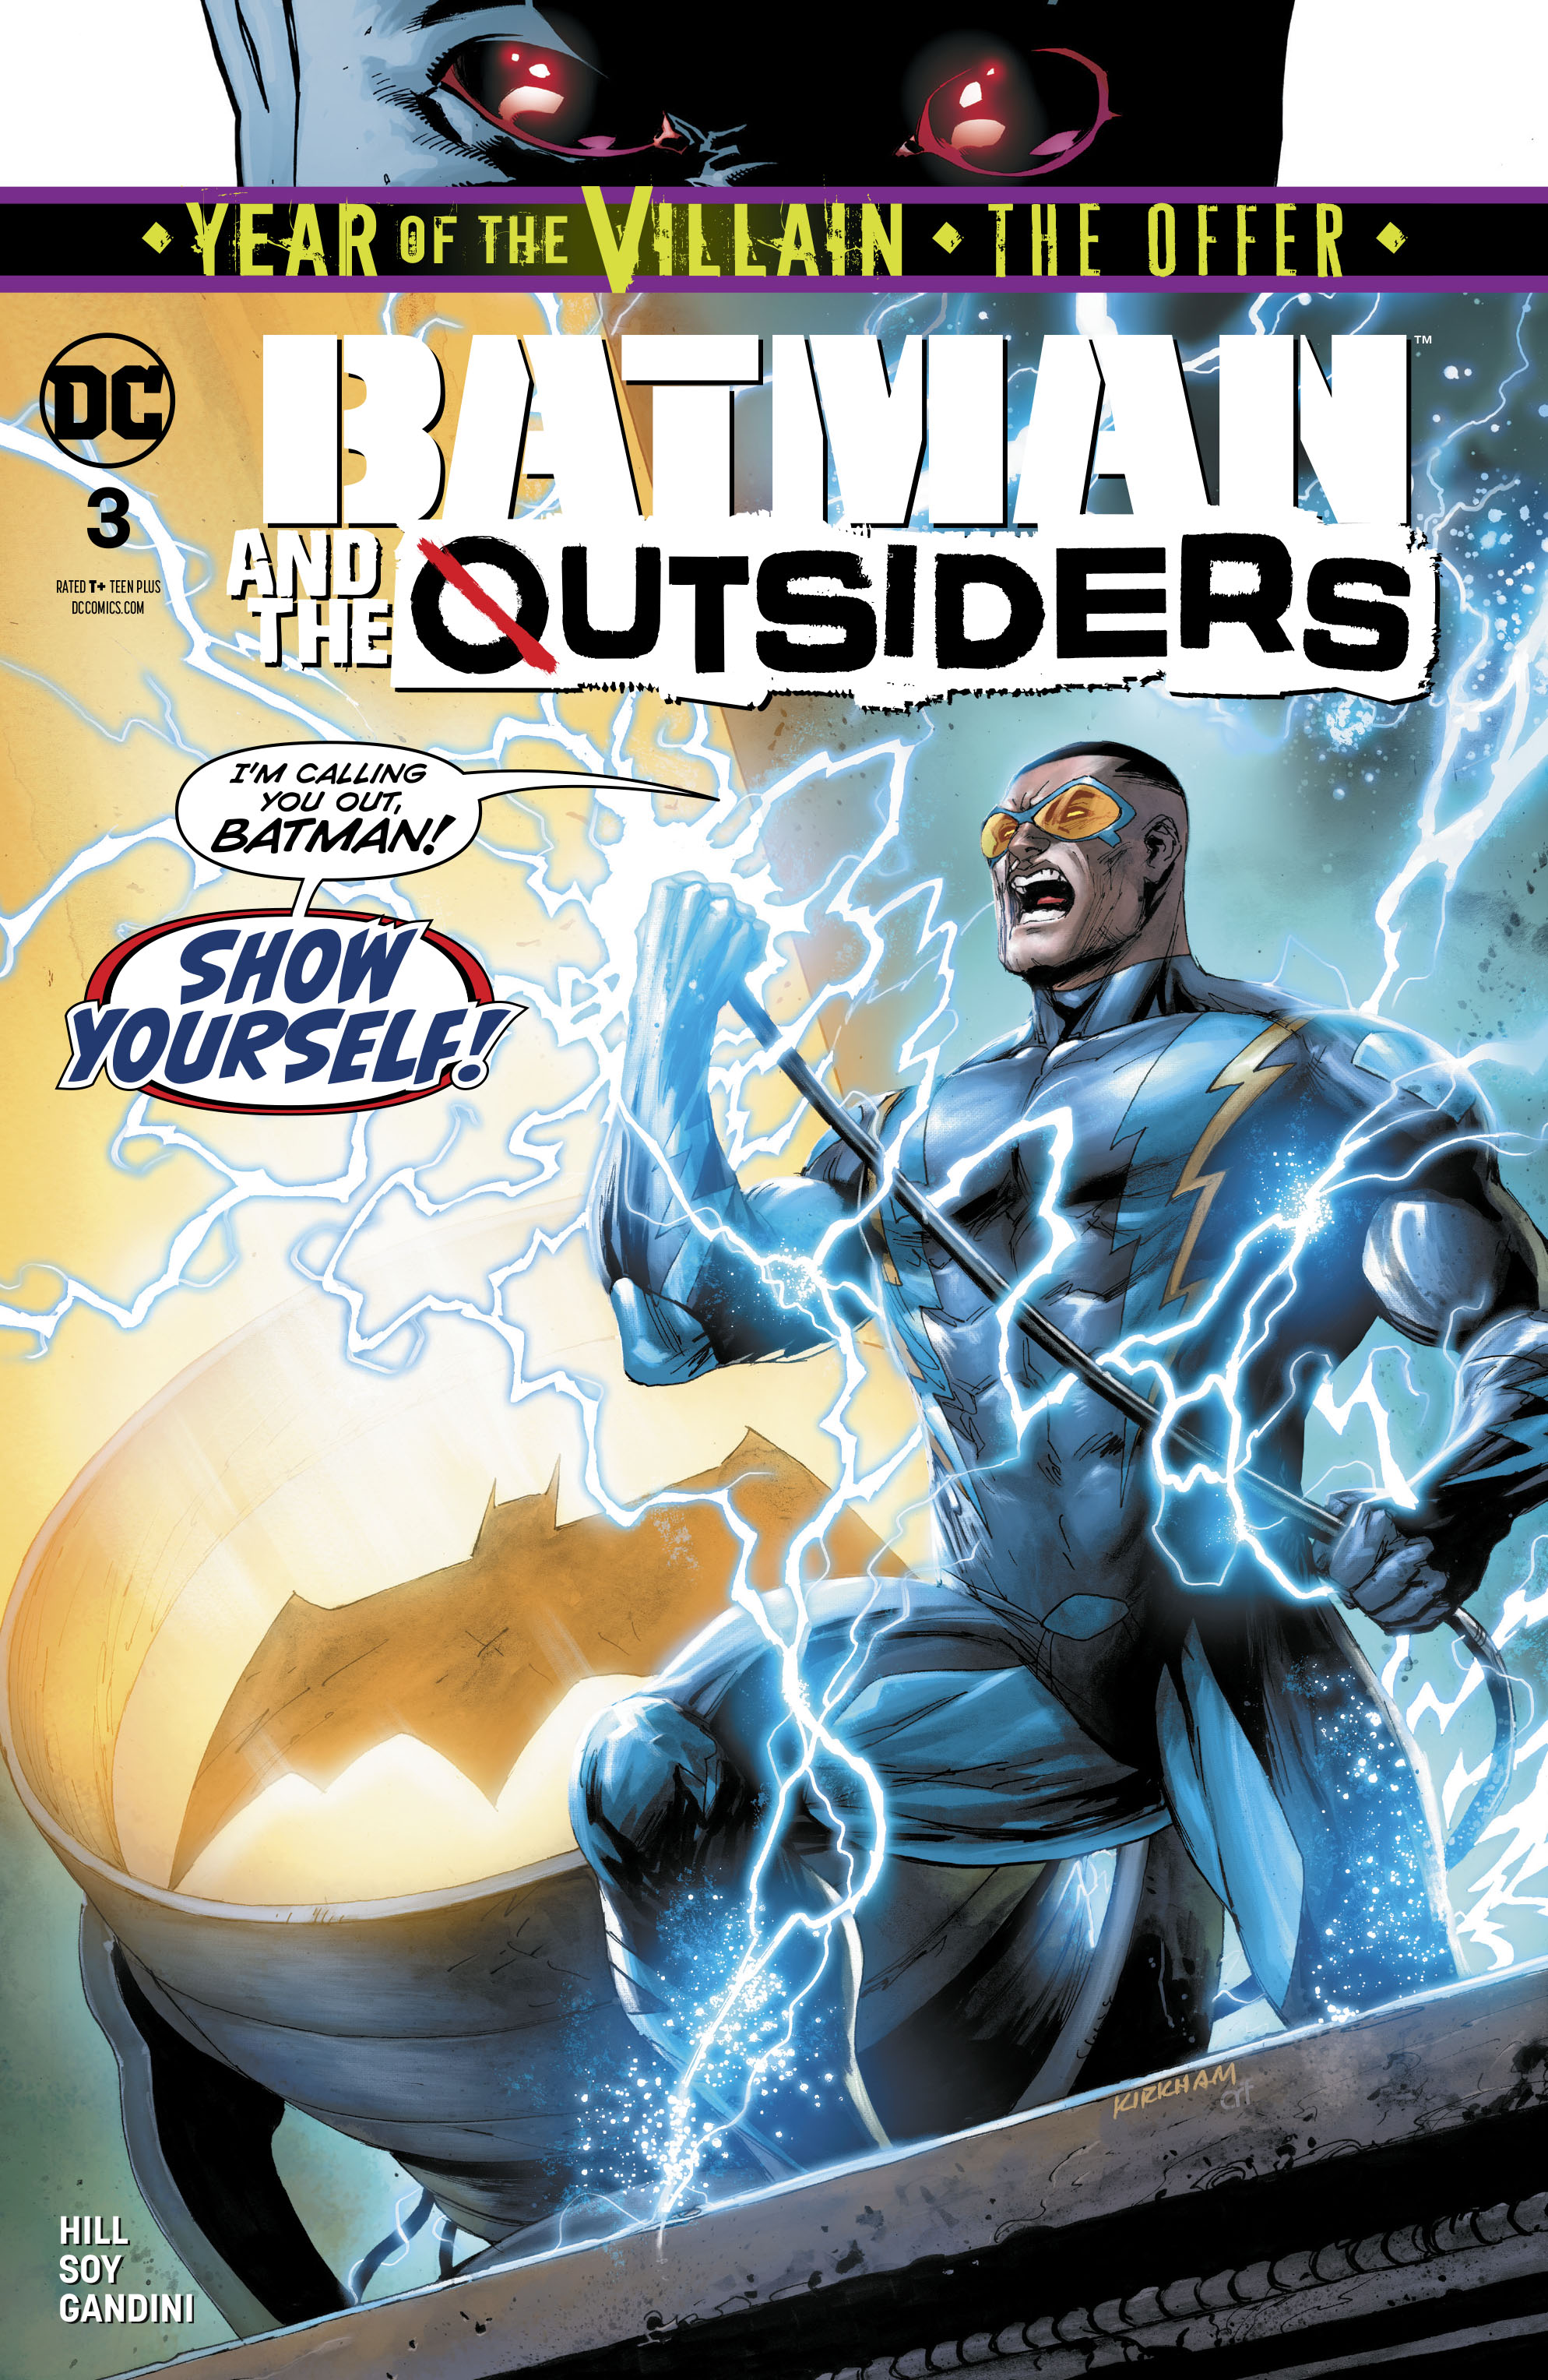 Batman and the Outsiders #3 Year of the Villain the Offer